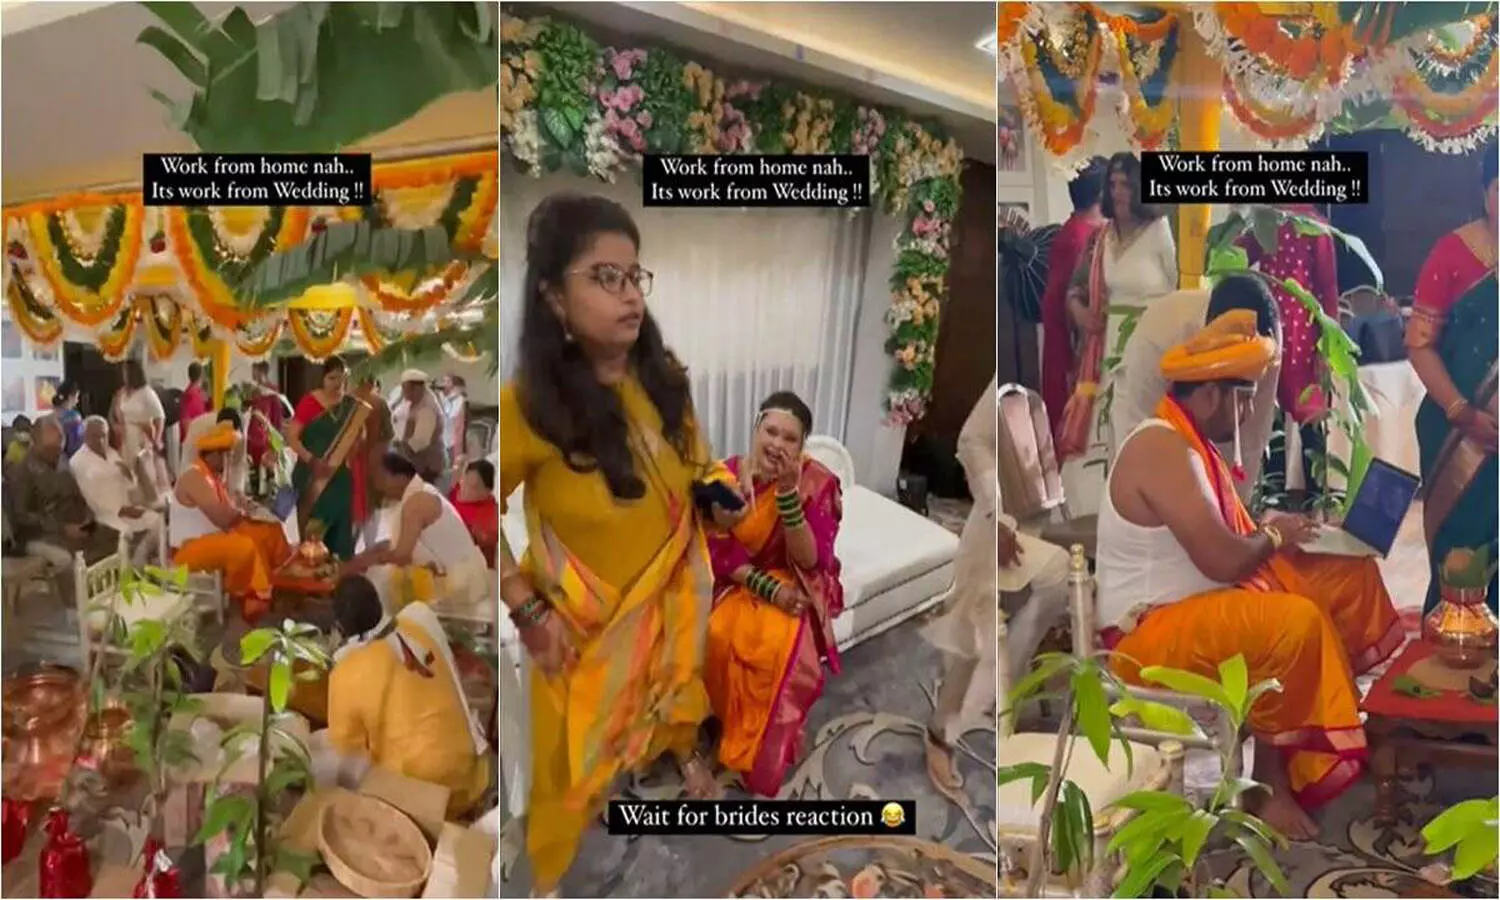 Work from wedding: Video of groom with laptop at mandap goes viral; netizens say Thats Epic